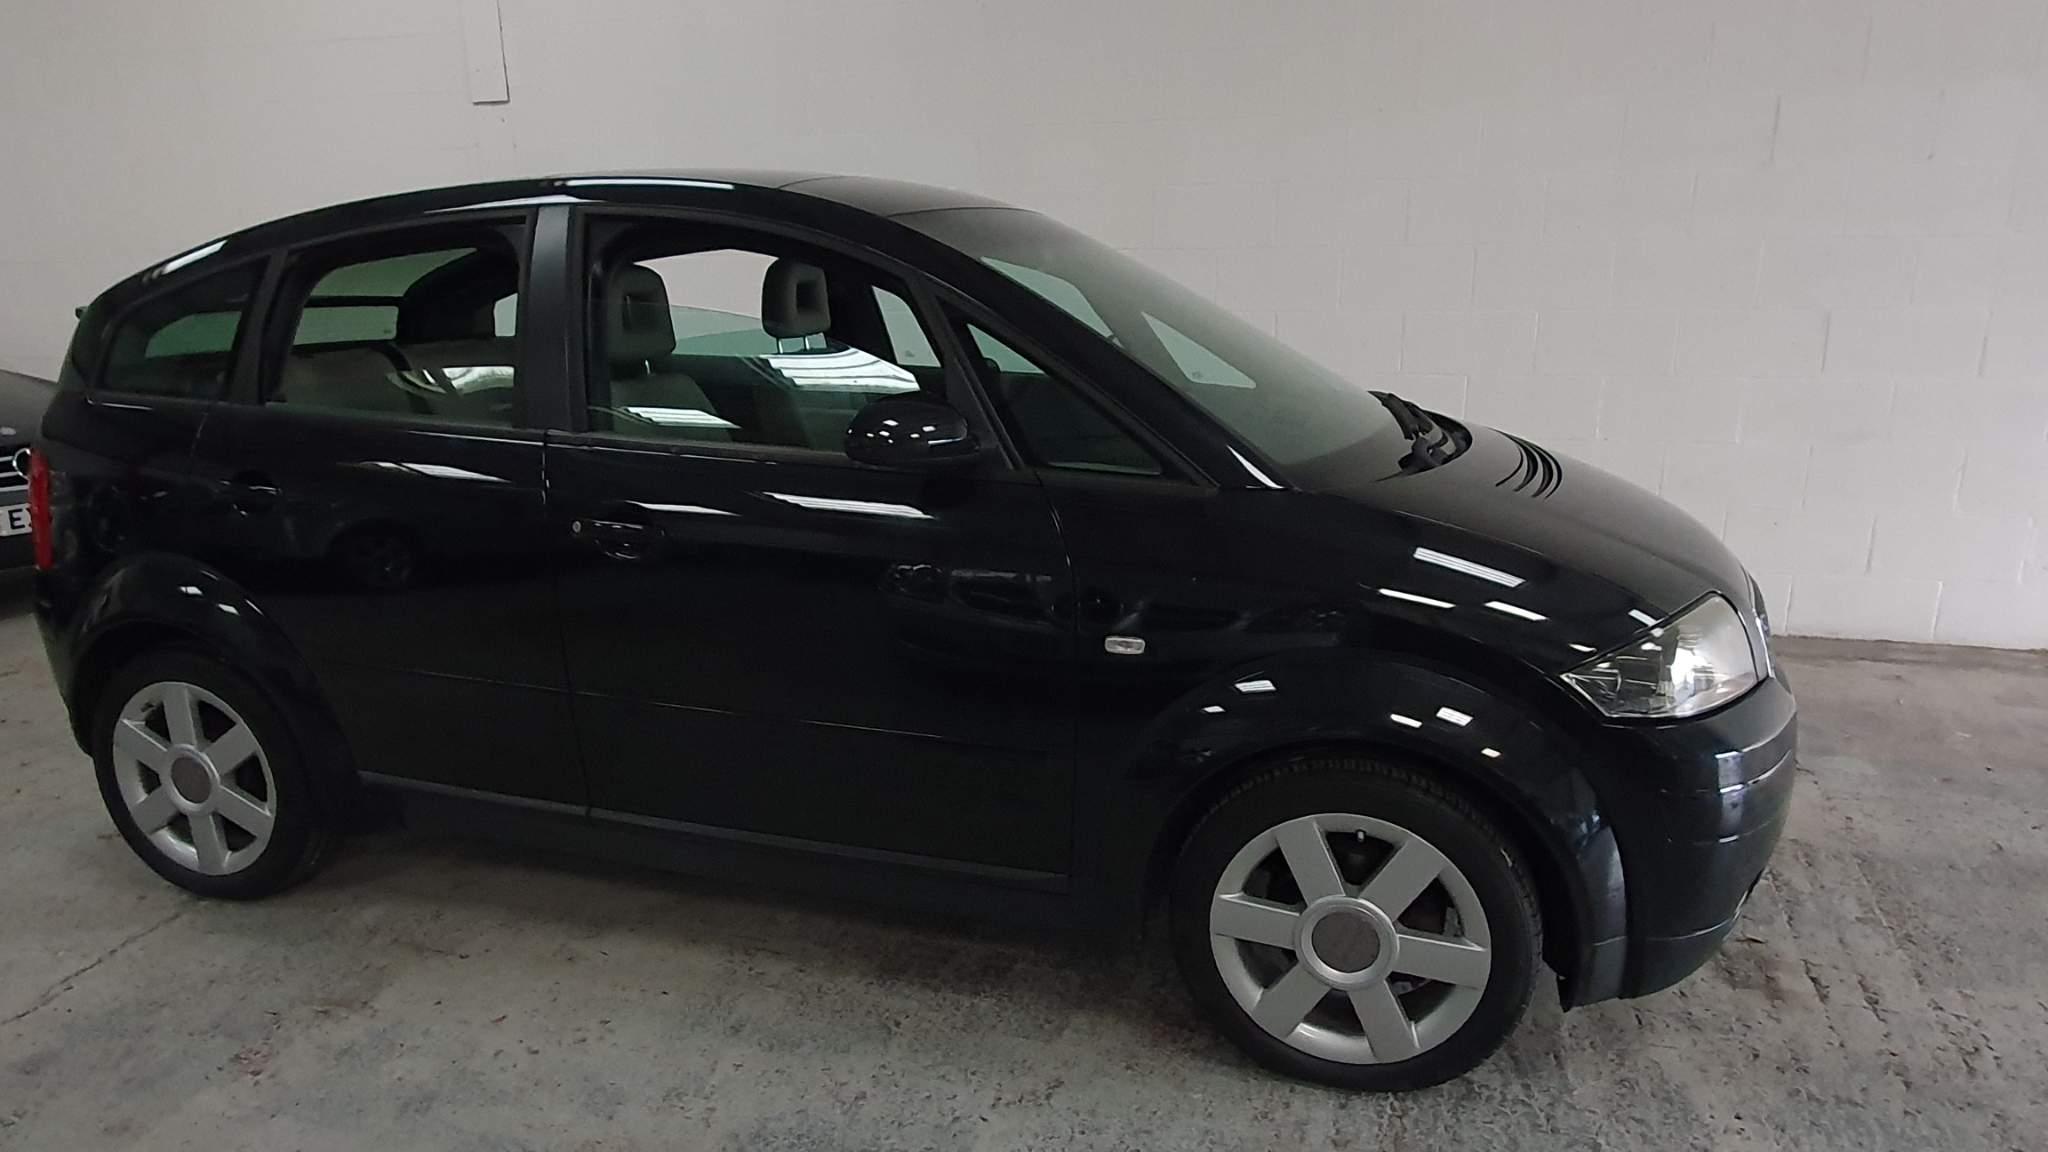 Used Audi A2 Review - 2000-2005